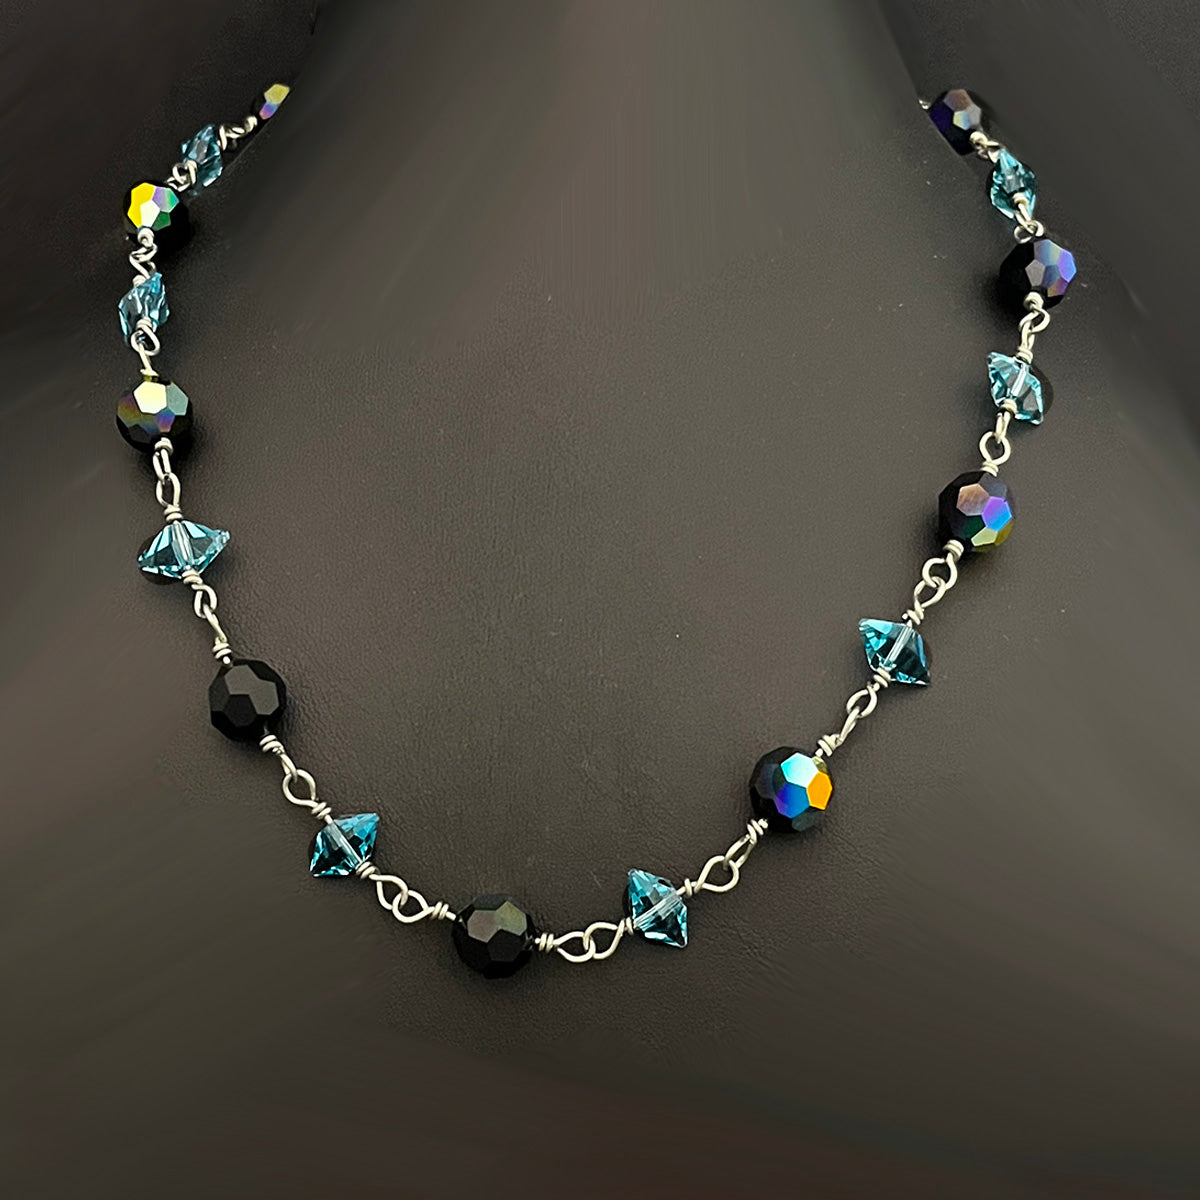 Bead Link Necklace with Aqua Spikes